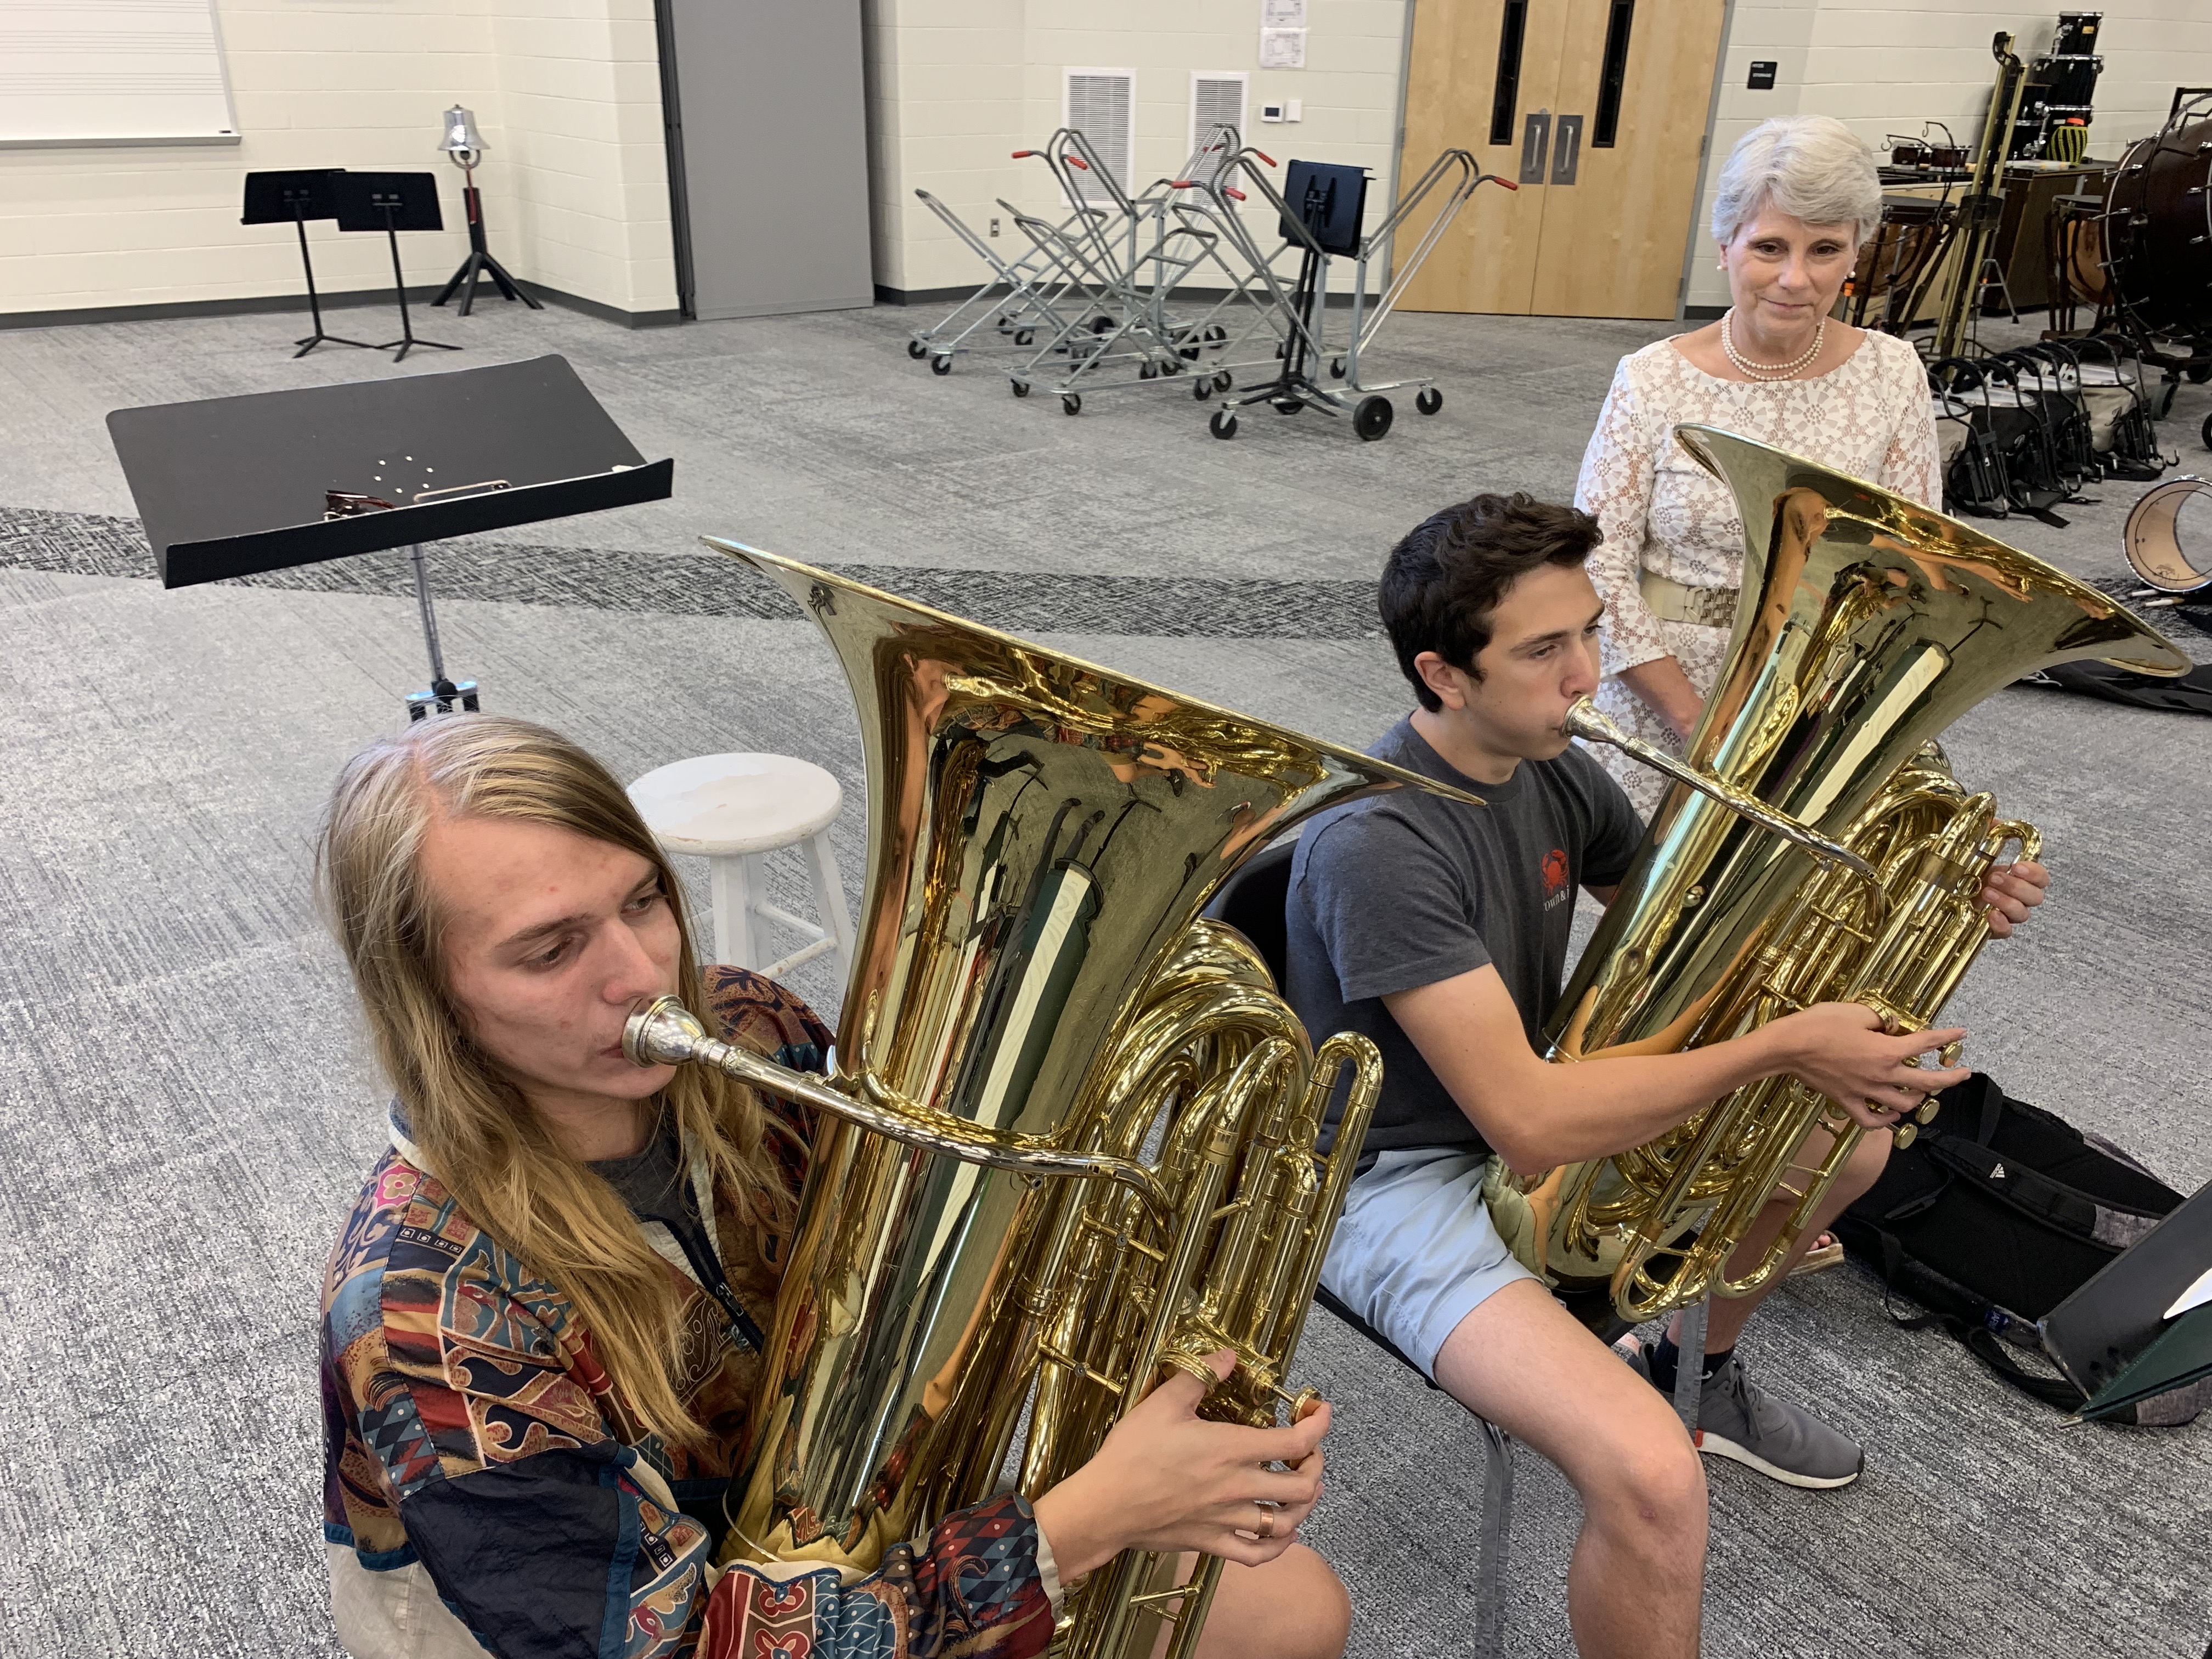 Students rehearse at Hoover High School in the suburbs of Birmingham, Alabama.